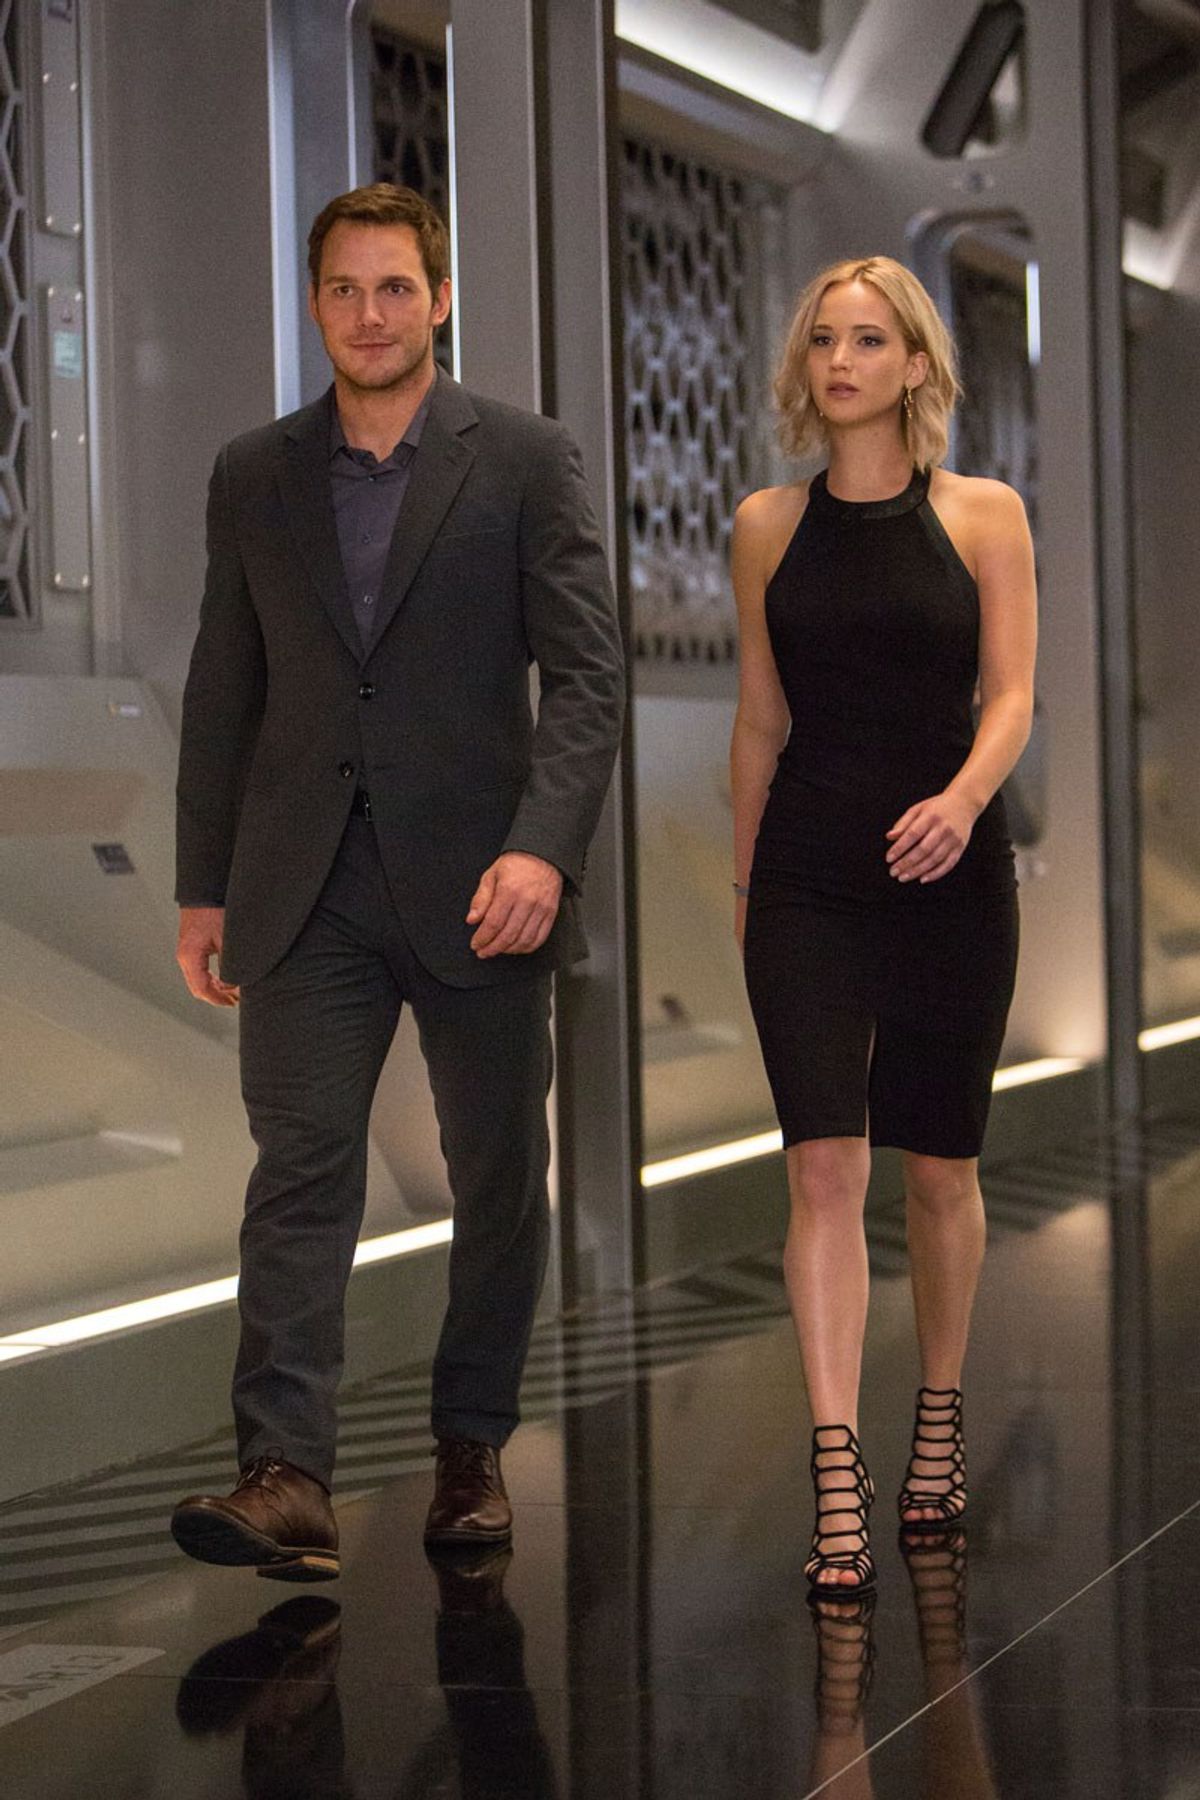 A Review Of "Passengers" And How It Focuses On Moral Dilemmas Present In Today's Society